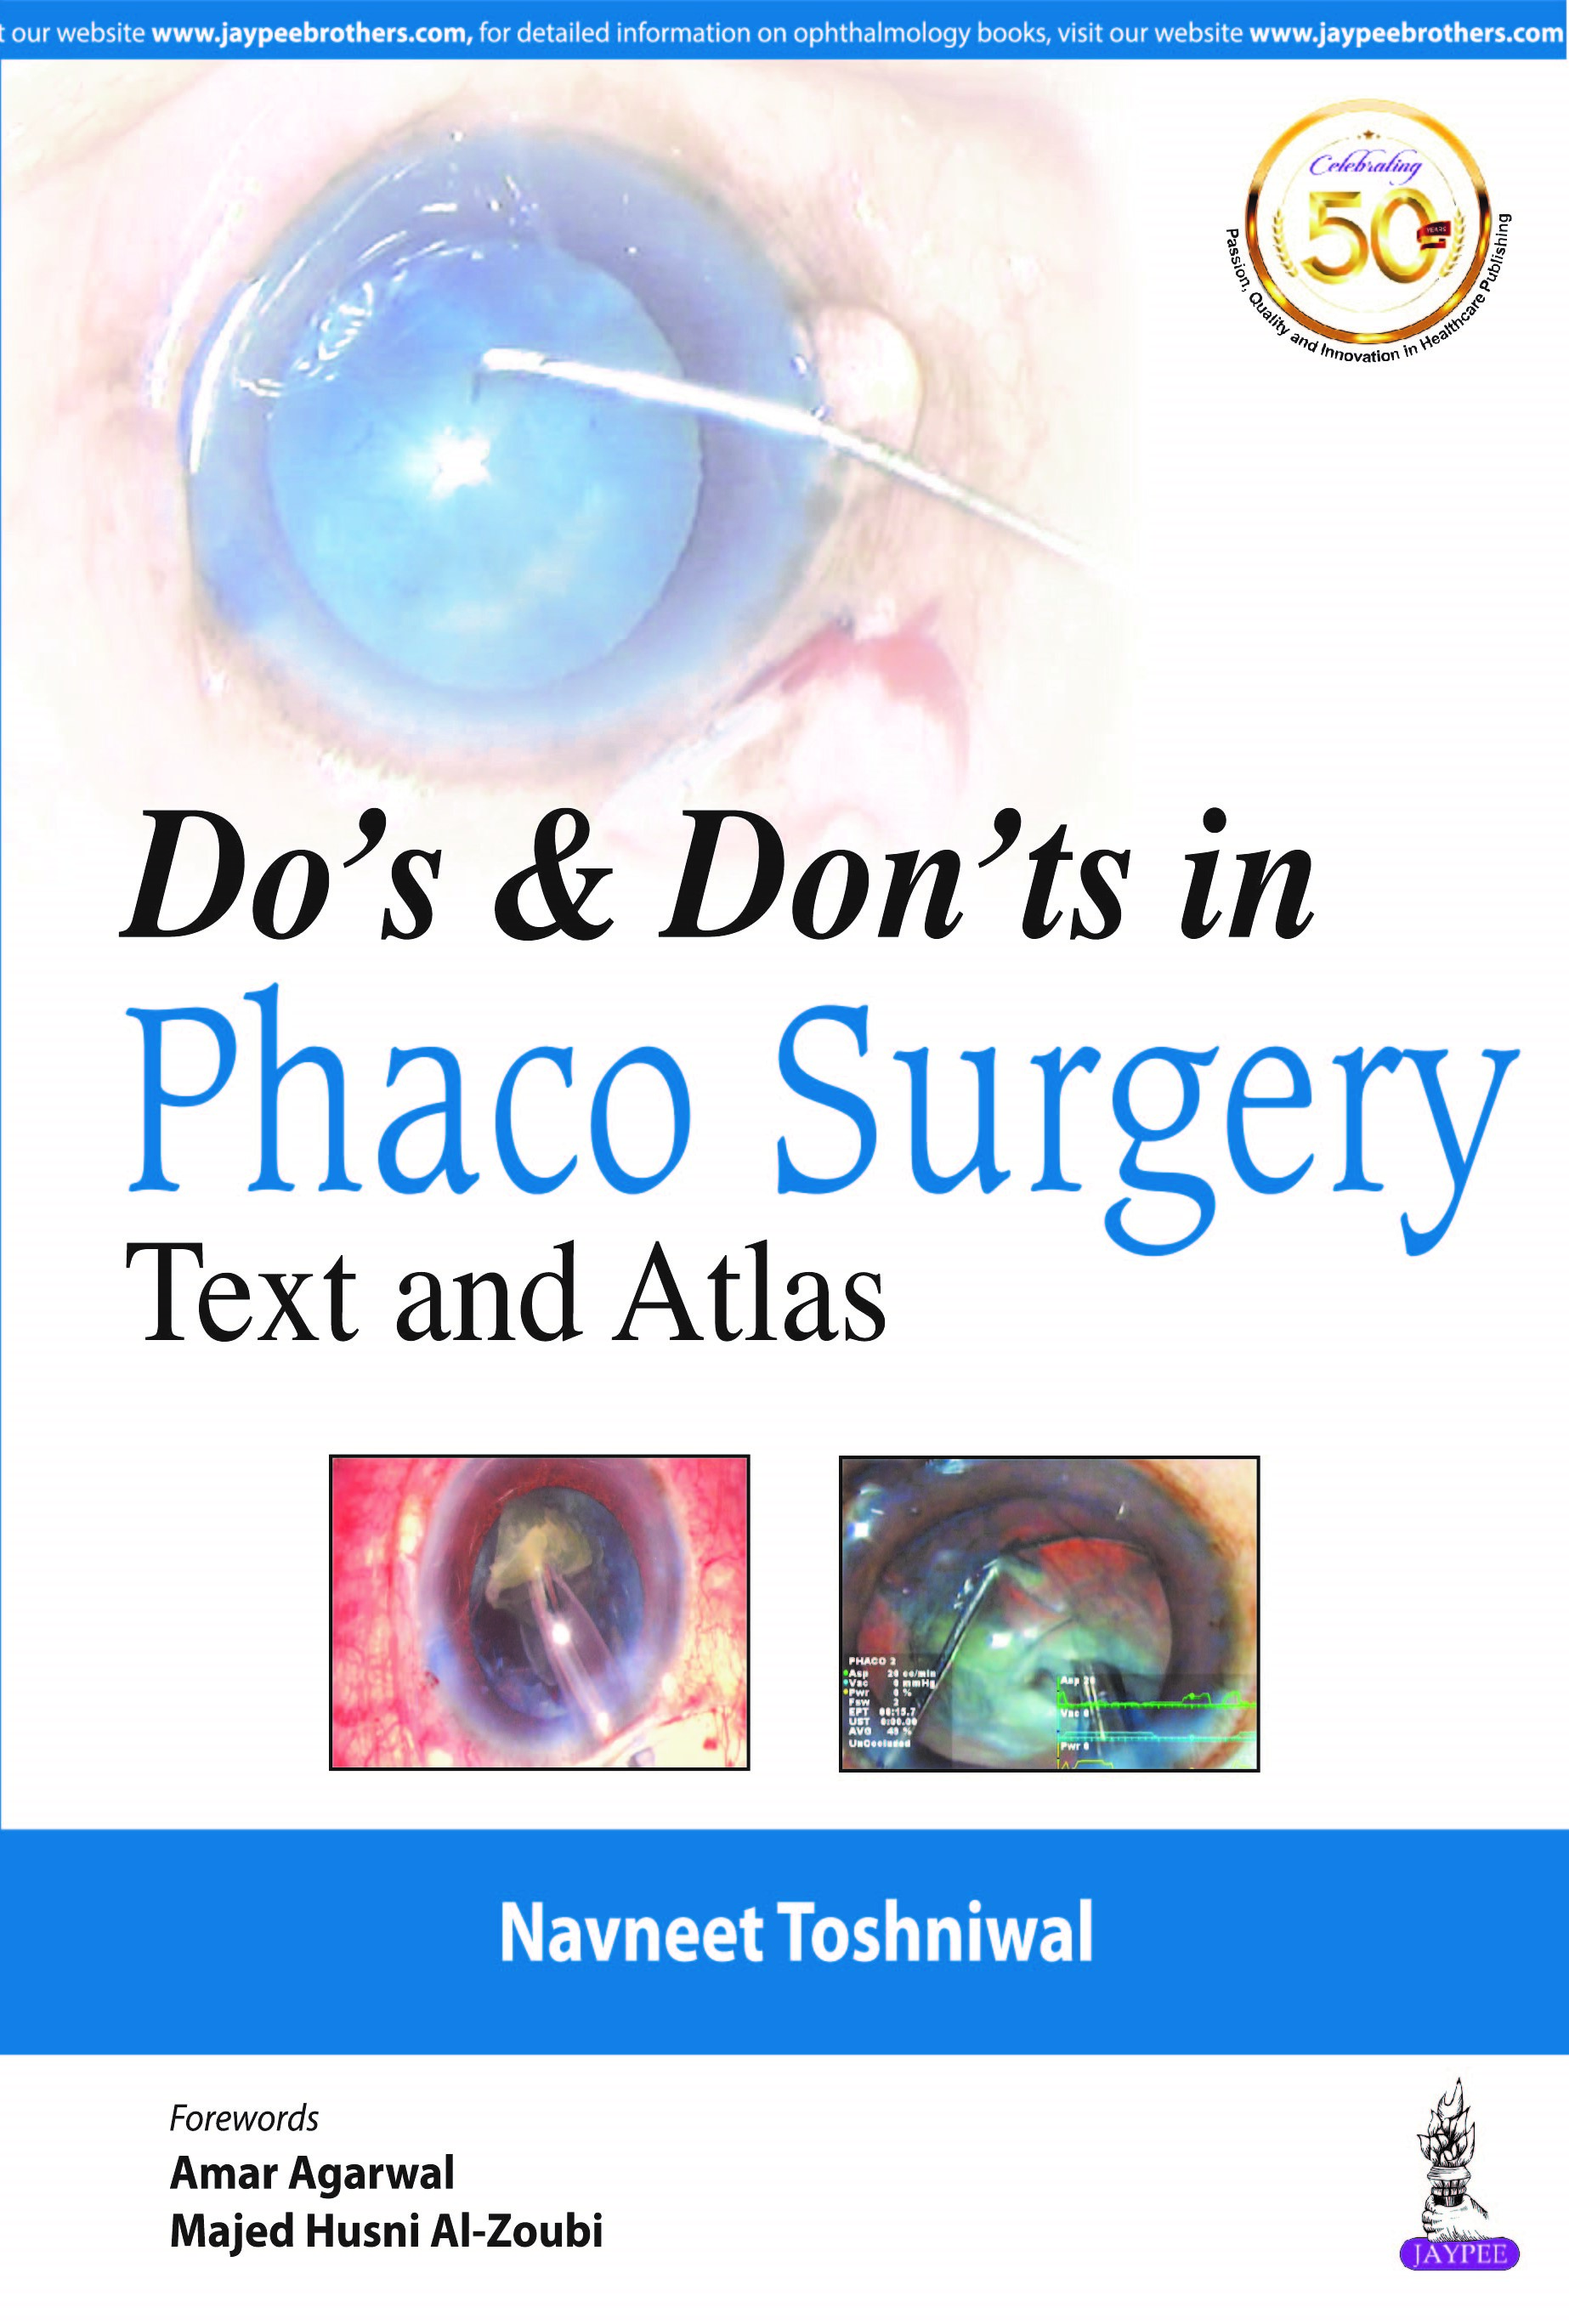 dos-donts-in-phaco-surgery-text-and-atlas